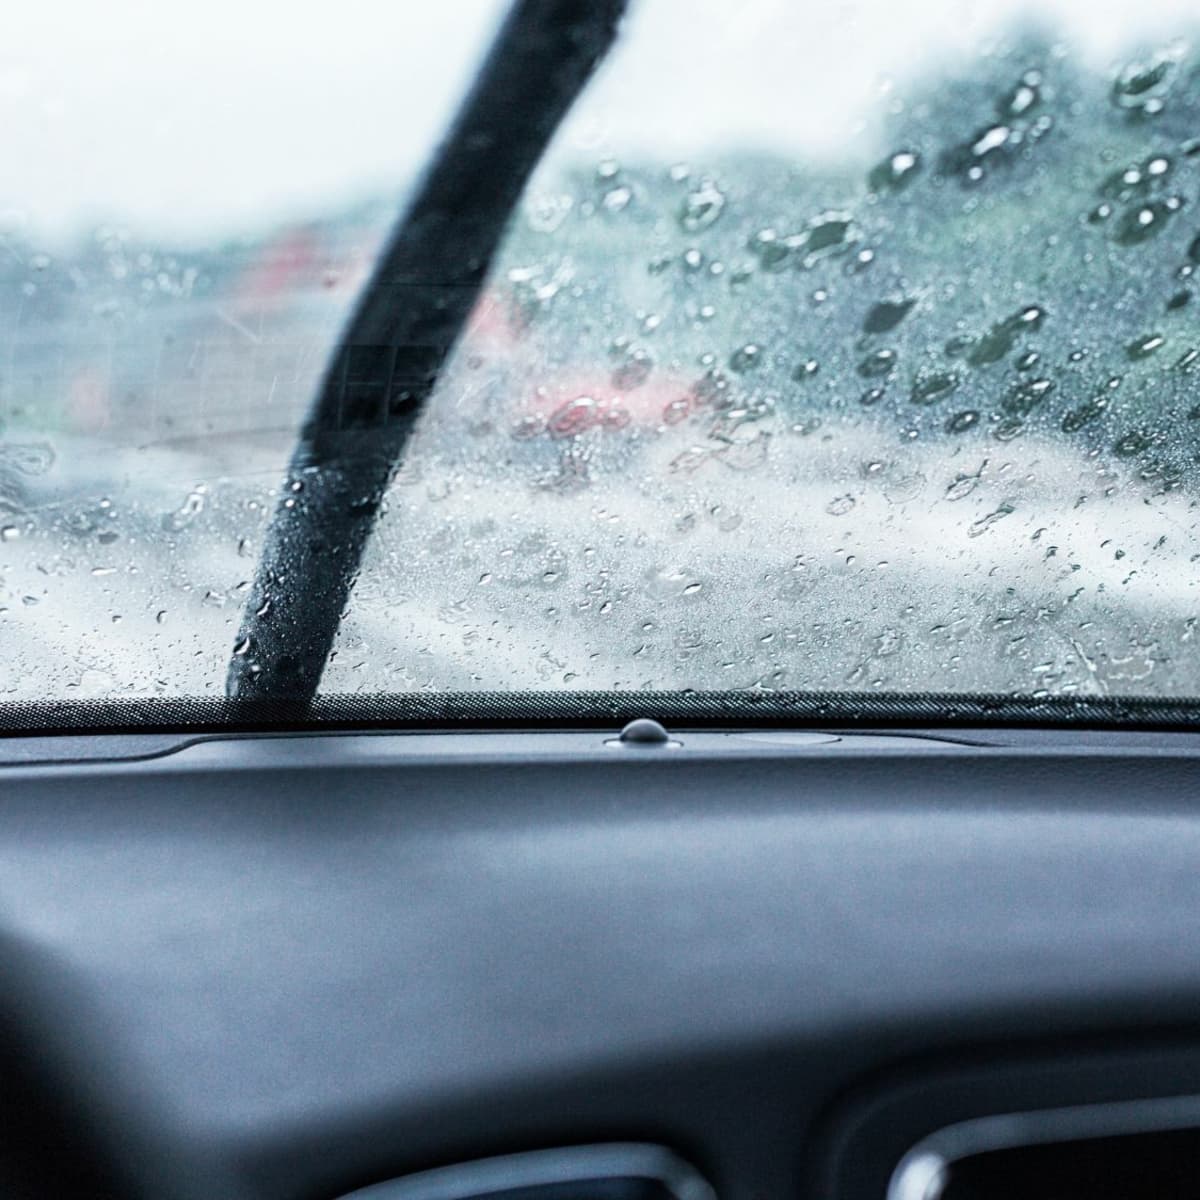 How to Defog Windows When It's Icy, Raining or Humid?